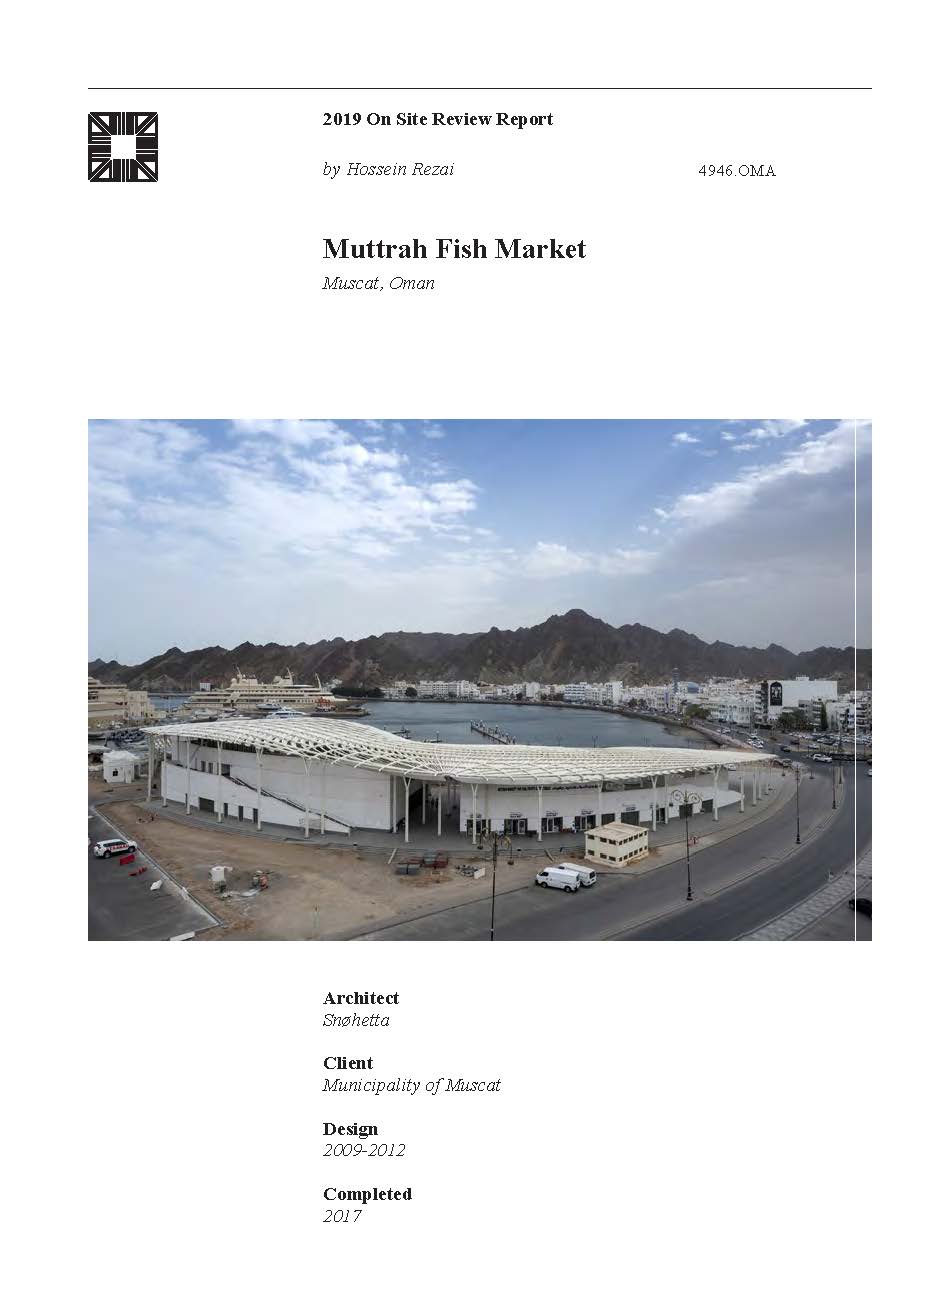 Muttrah Fish Market On-site Review Report